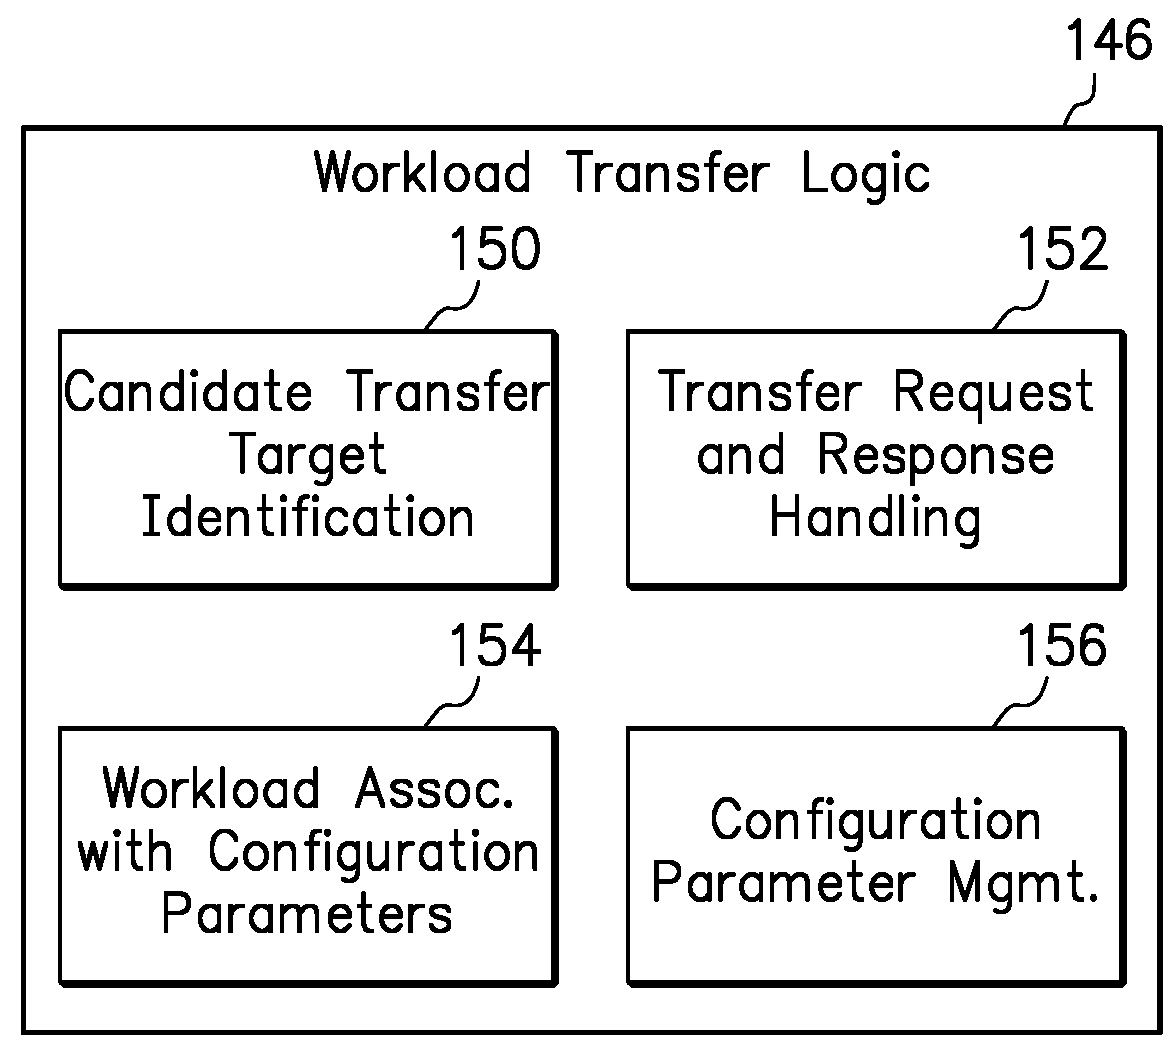 Transferring a server configuration parameter along with a workload